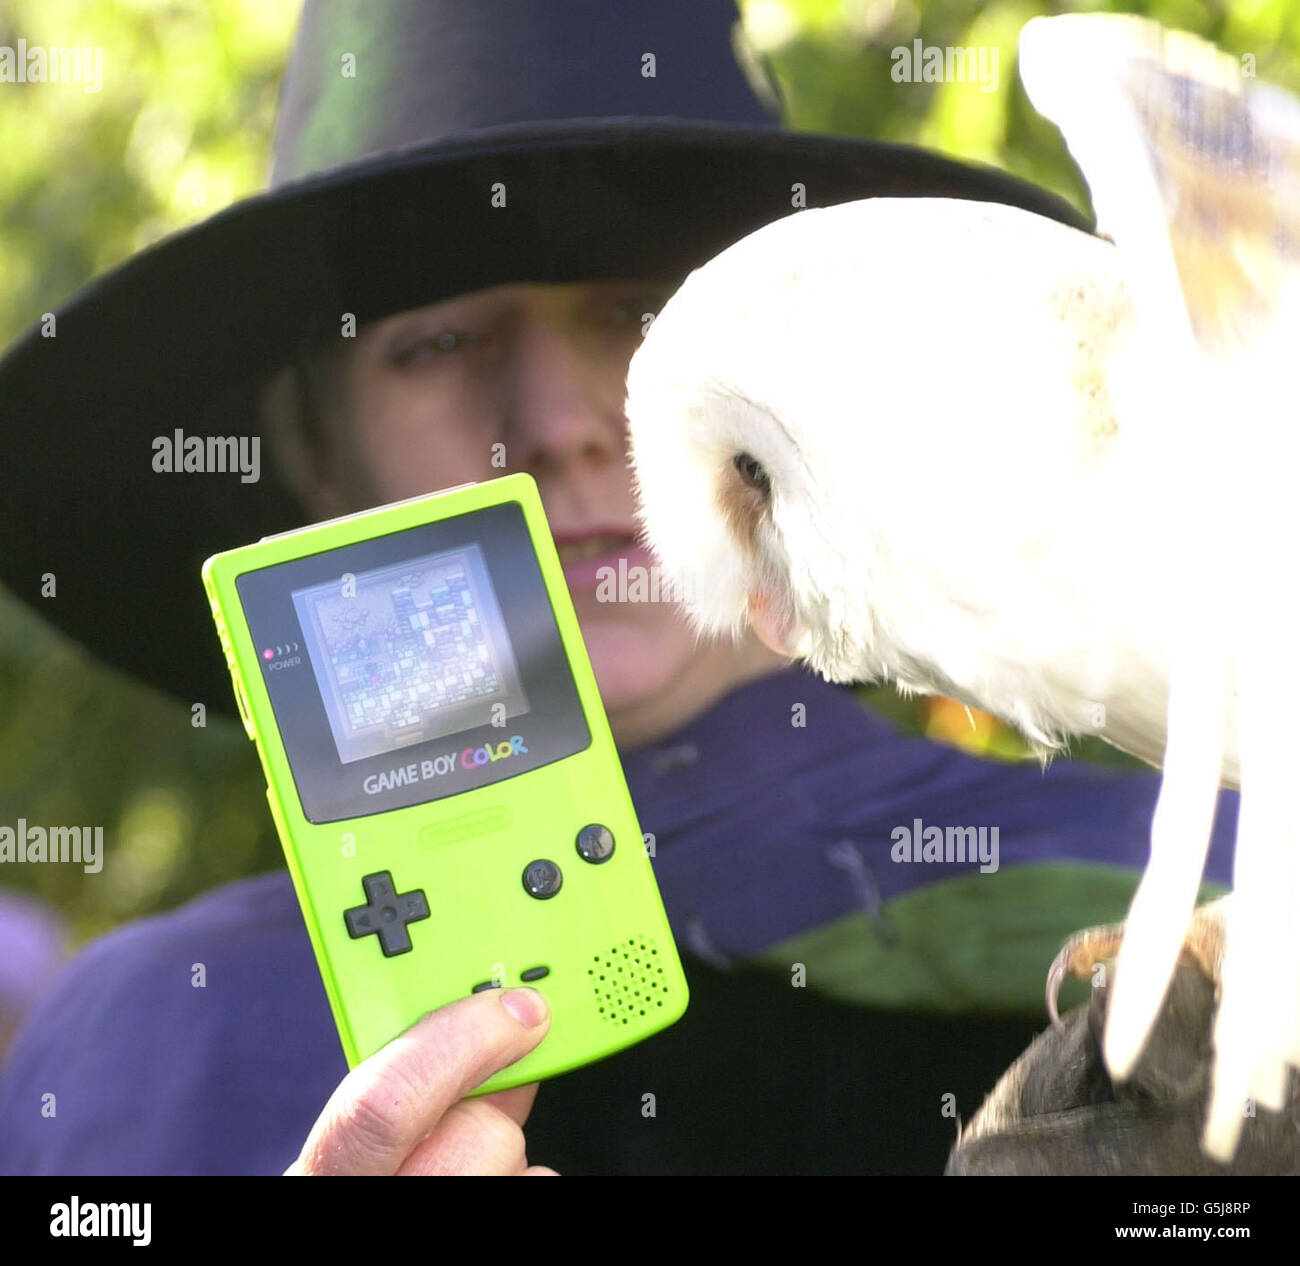 Frosty the Snow Owl, aged 3, helps out at the launch of Harry Potter and the Philosopher's Stone for GameBoy Colour (pictured), GameBoy Advance, PC and Sony Playsation at Chelsea Physic Garden in London. * The gardens were transformed for the day into Professor Sprout's Herbology gardens with pumpkins, mandrake roots and tours of the Forbidden Forest available for the adventurous. Stock Photo